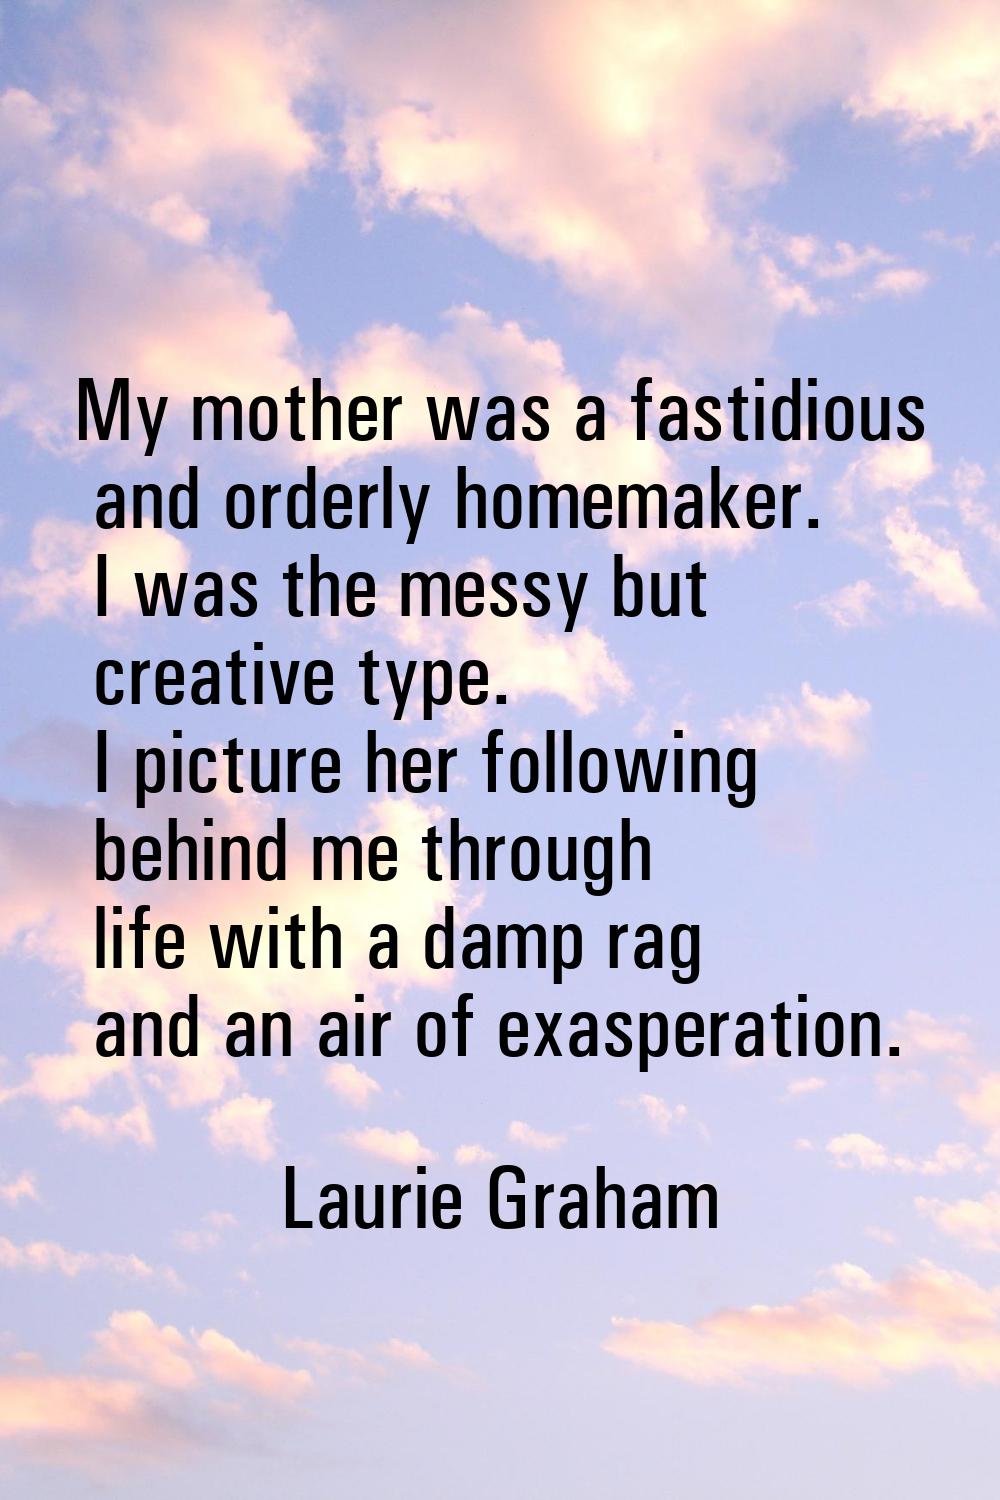 My mother was a fastidious and orderly homemaker. I was the messy but creative type. I picture her 